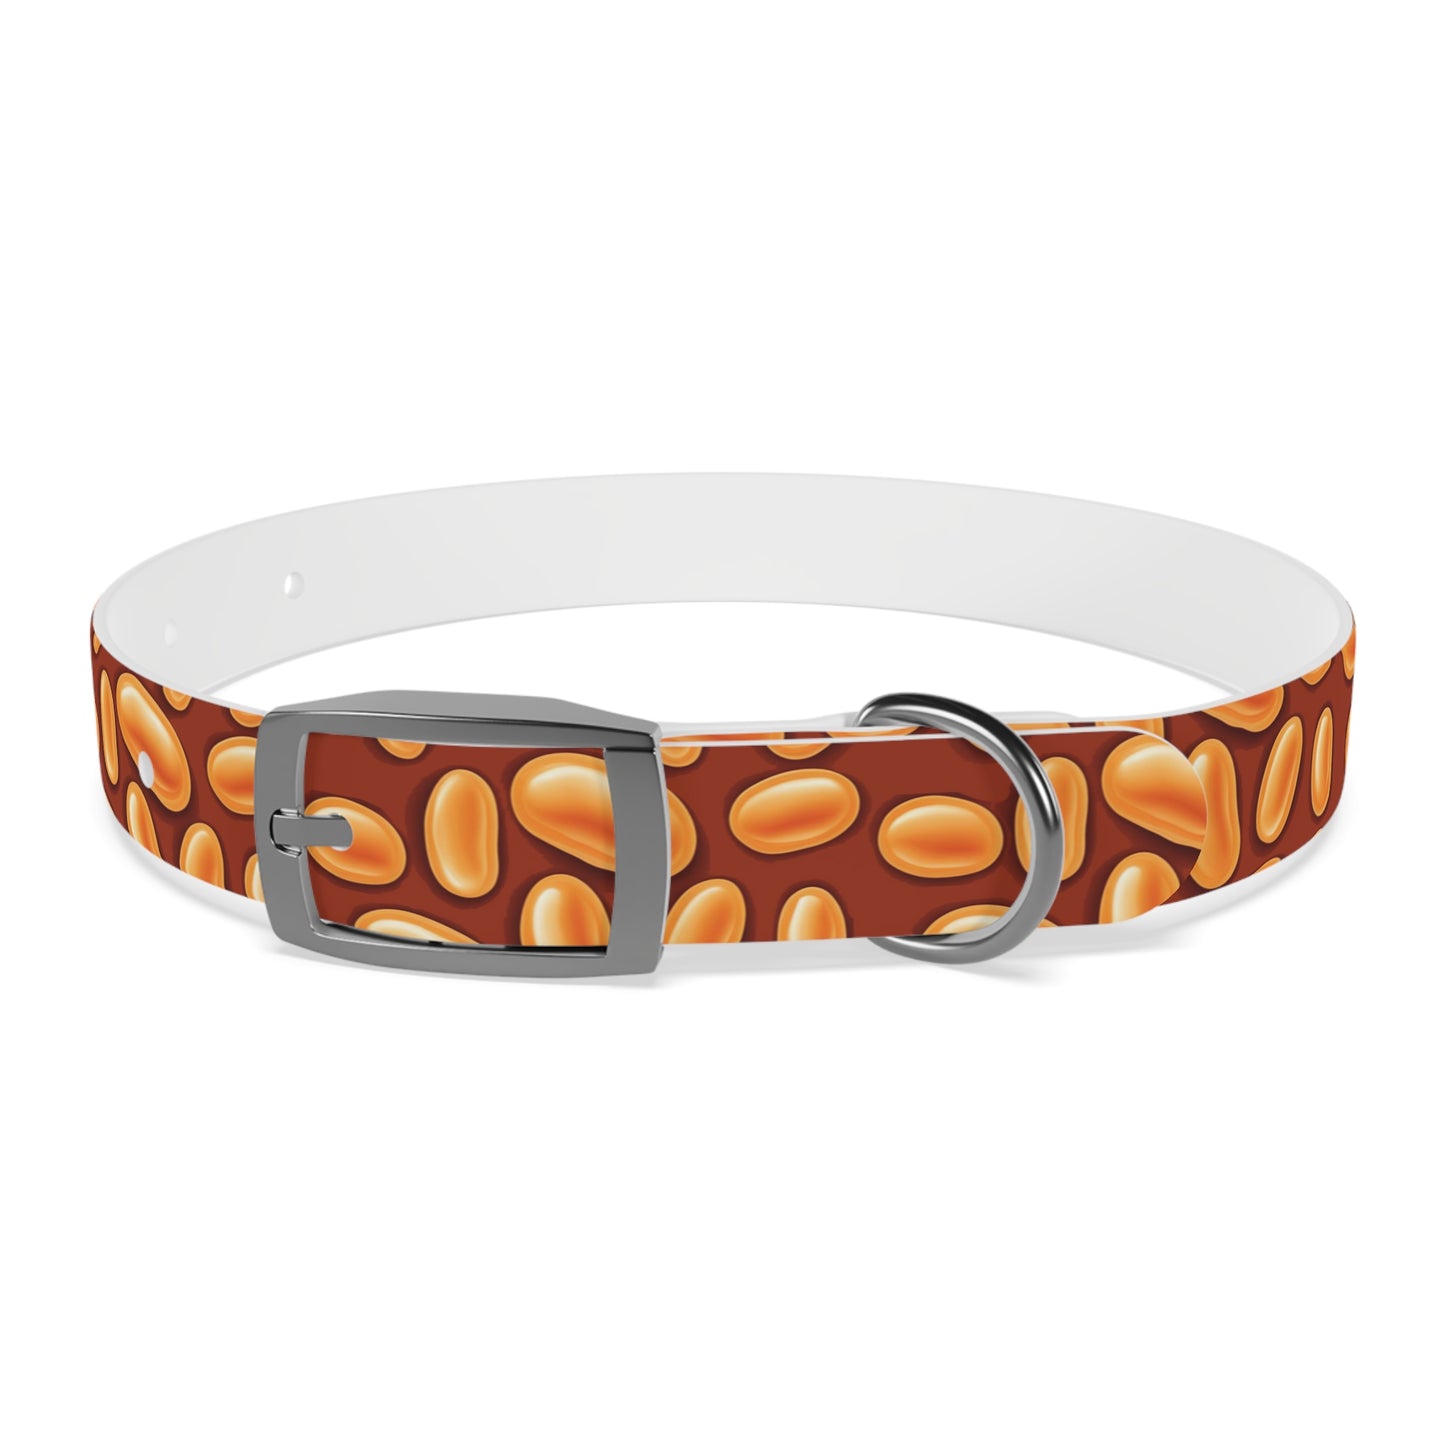 Durable Beans Dog Collar – Stylish and Sturdy Pet Accessories